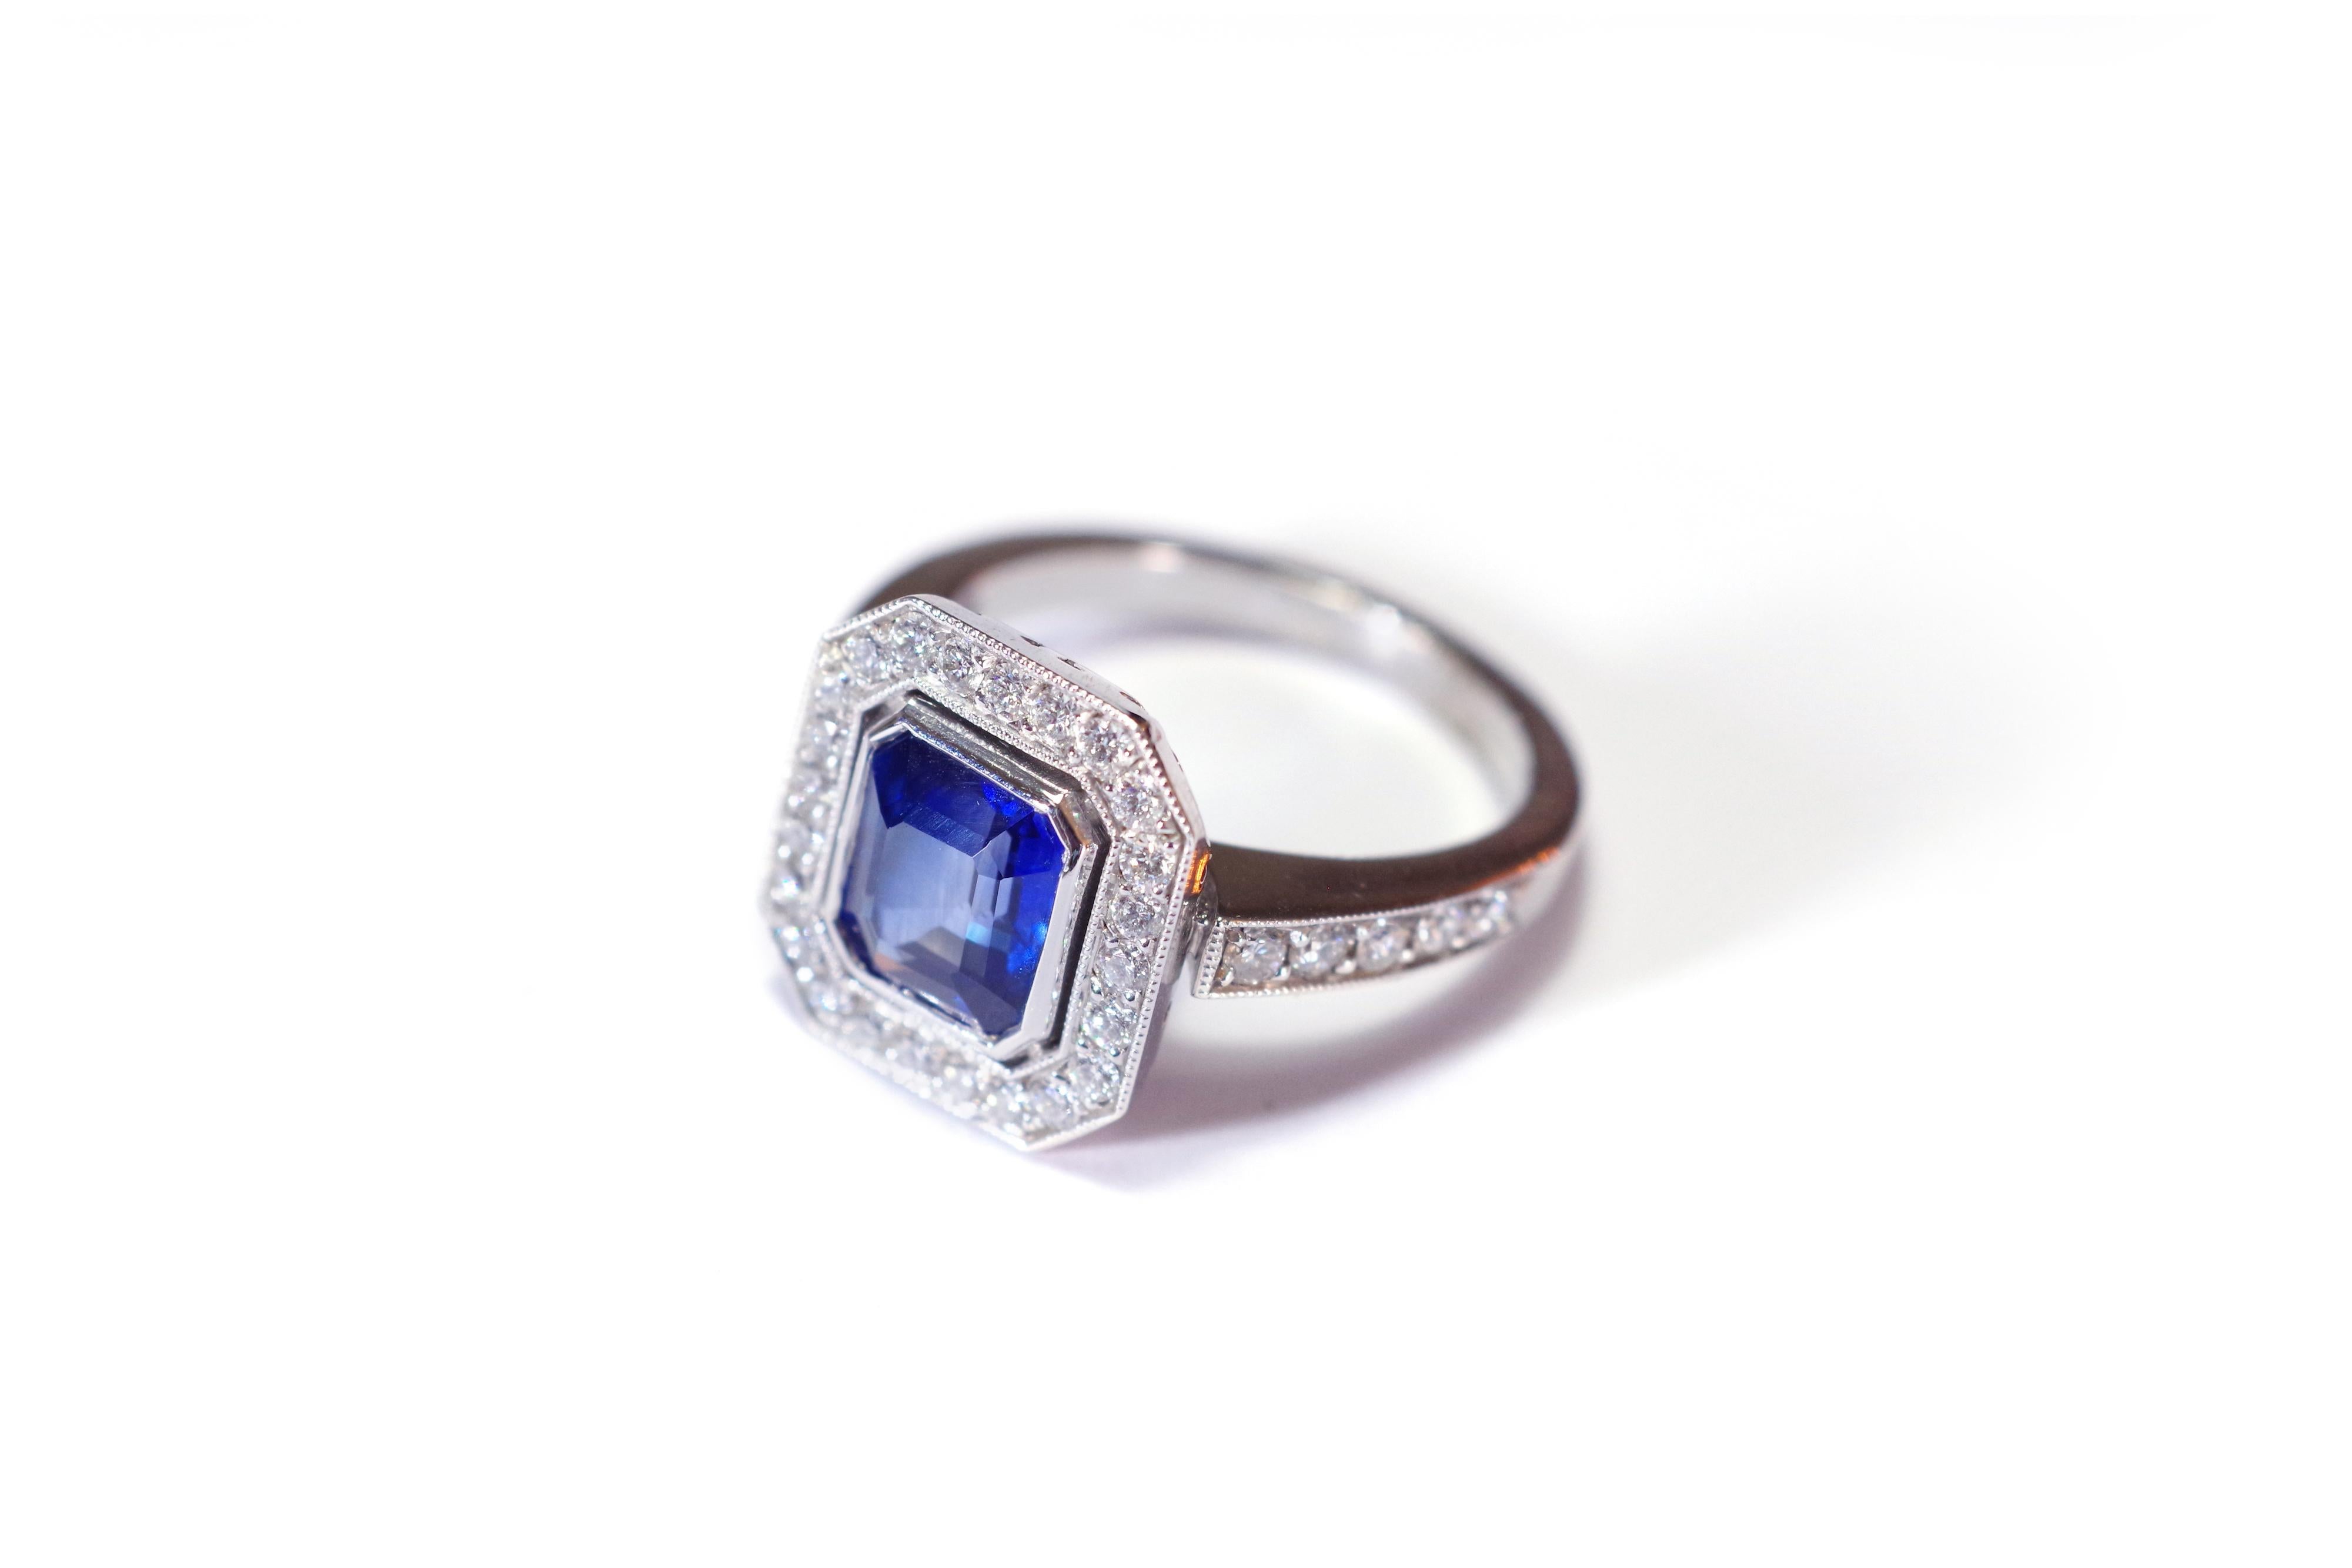 Octagon Cut Art Deco style sapphire ring in 18k white gold, pre-owned sapphire wedding ring For Sale